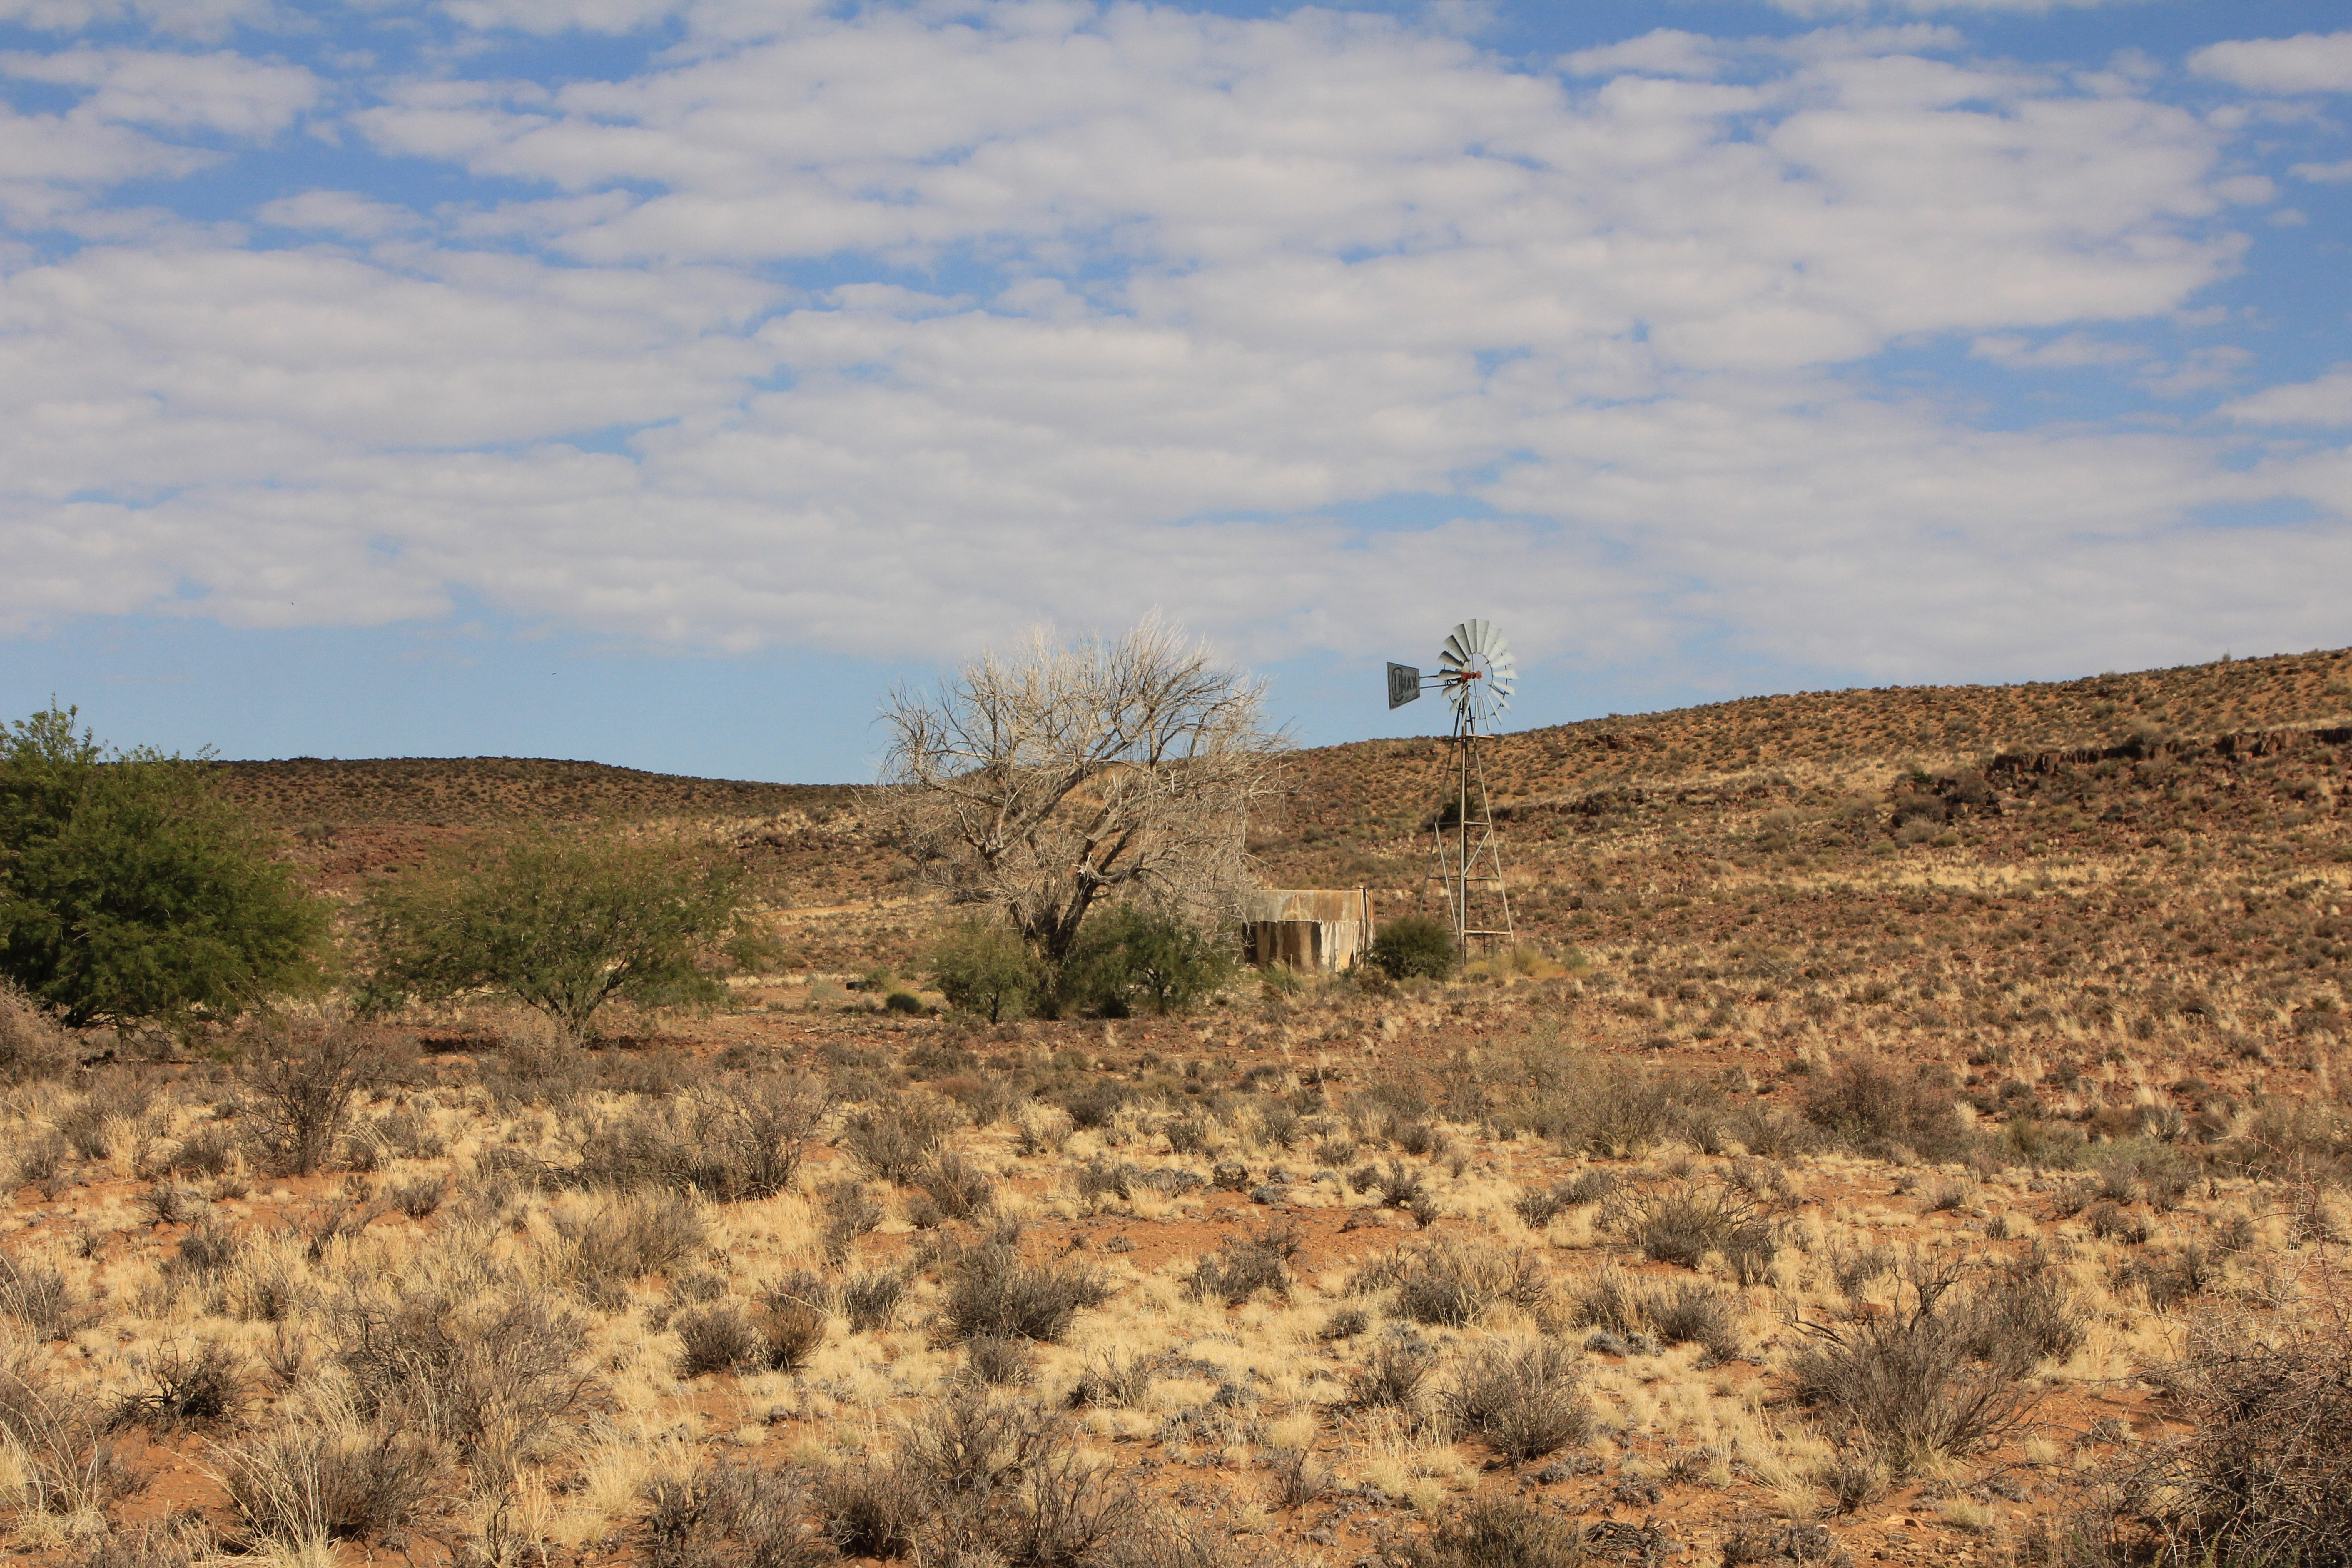 In the thrifty drylands, if it works, it stays. The Karoo remains a stronghold of wind pumps. Image: Chris Marais